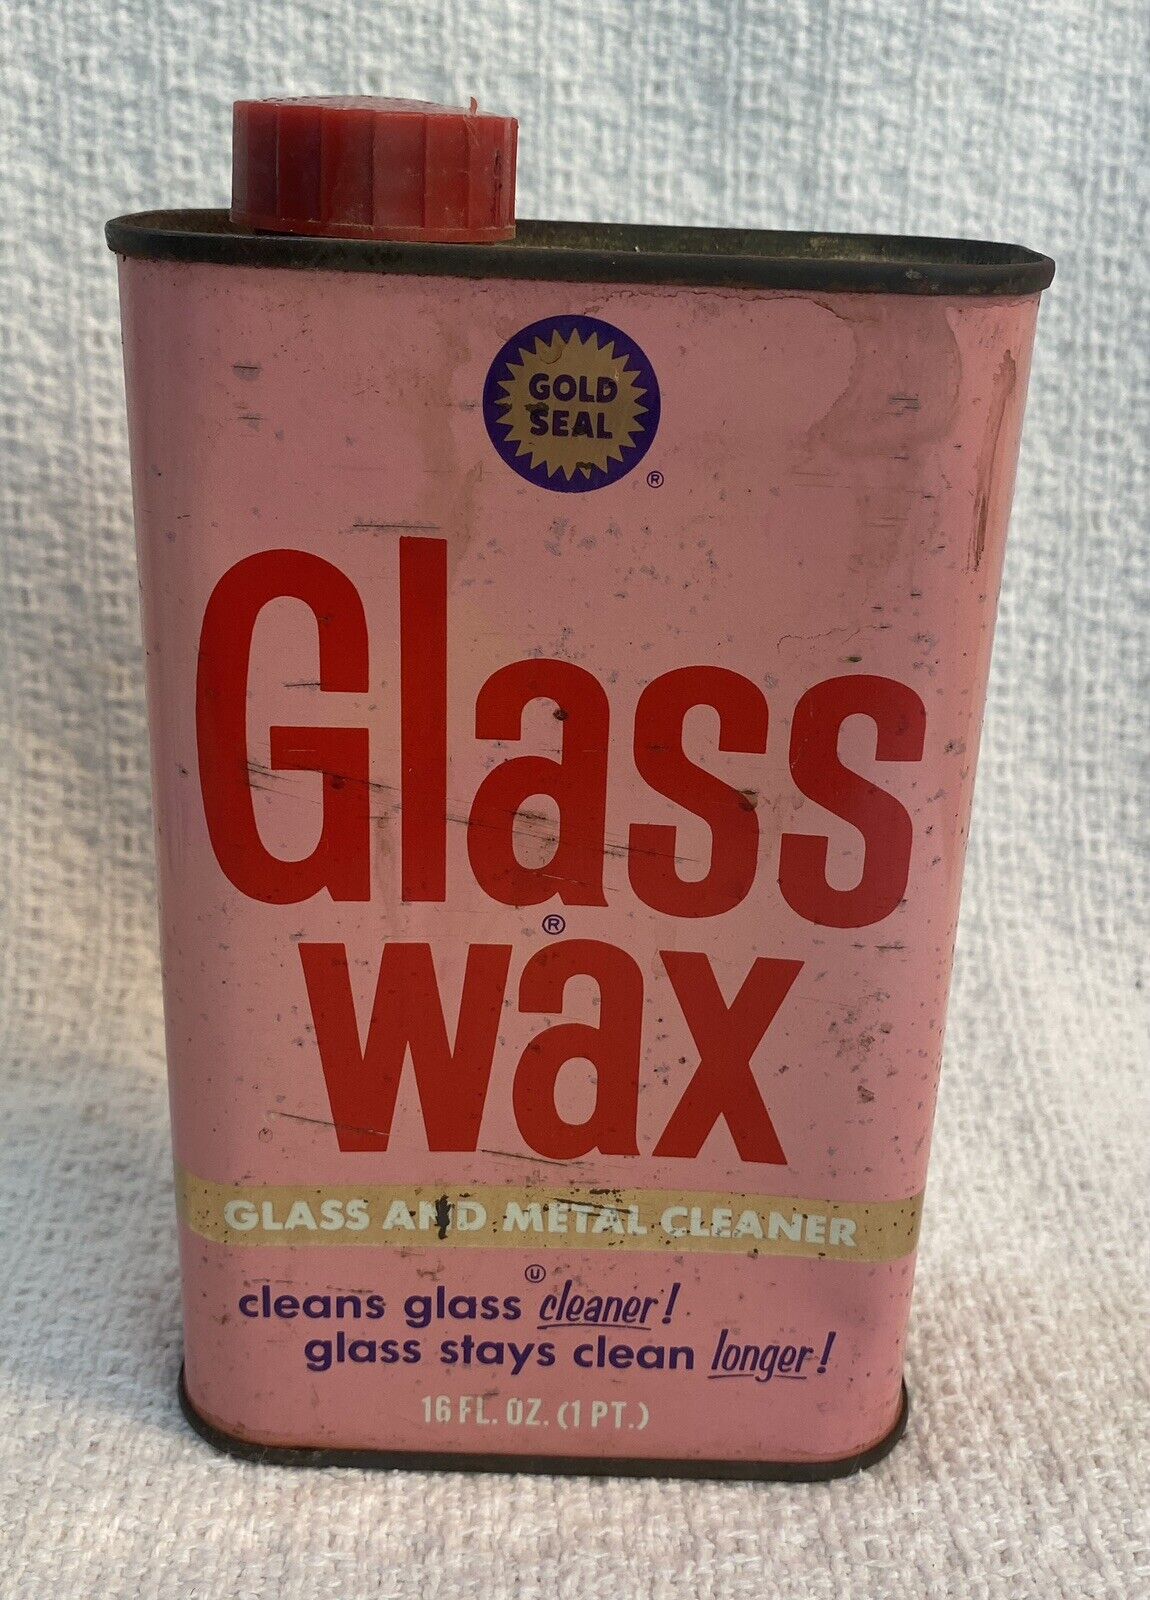 Vintage GOLD SEAL Glass Wax GLASS AND METAL CLEANER 1969 Metal Advertising Can